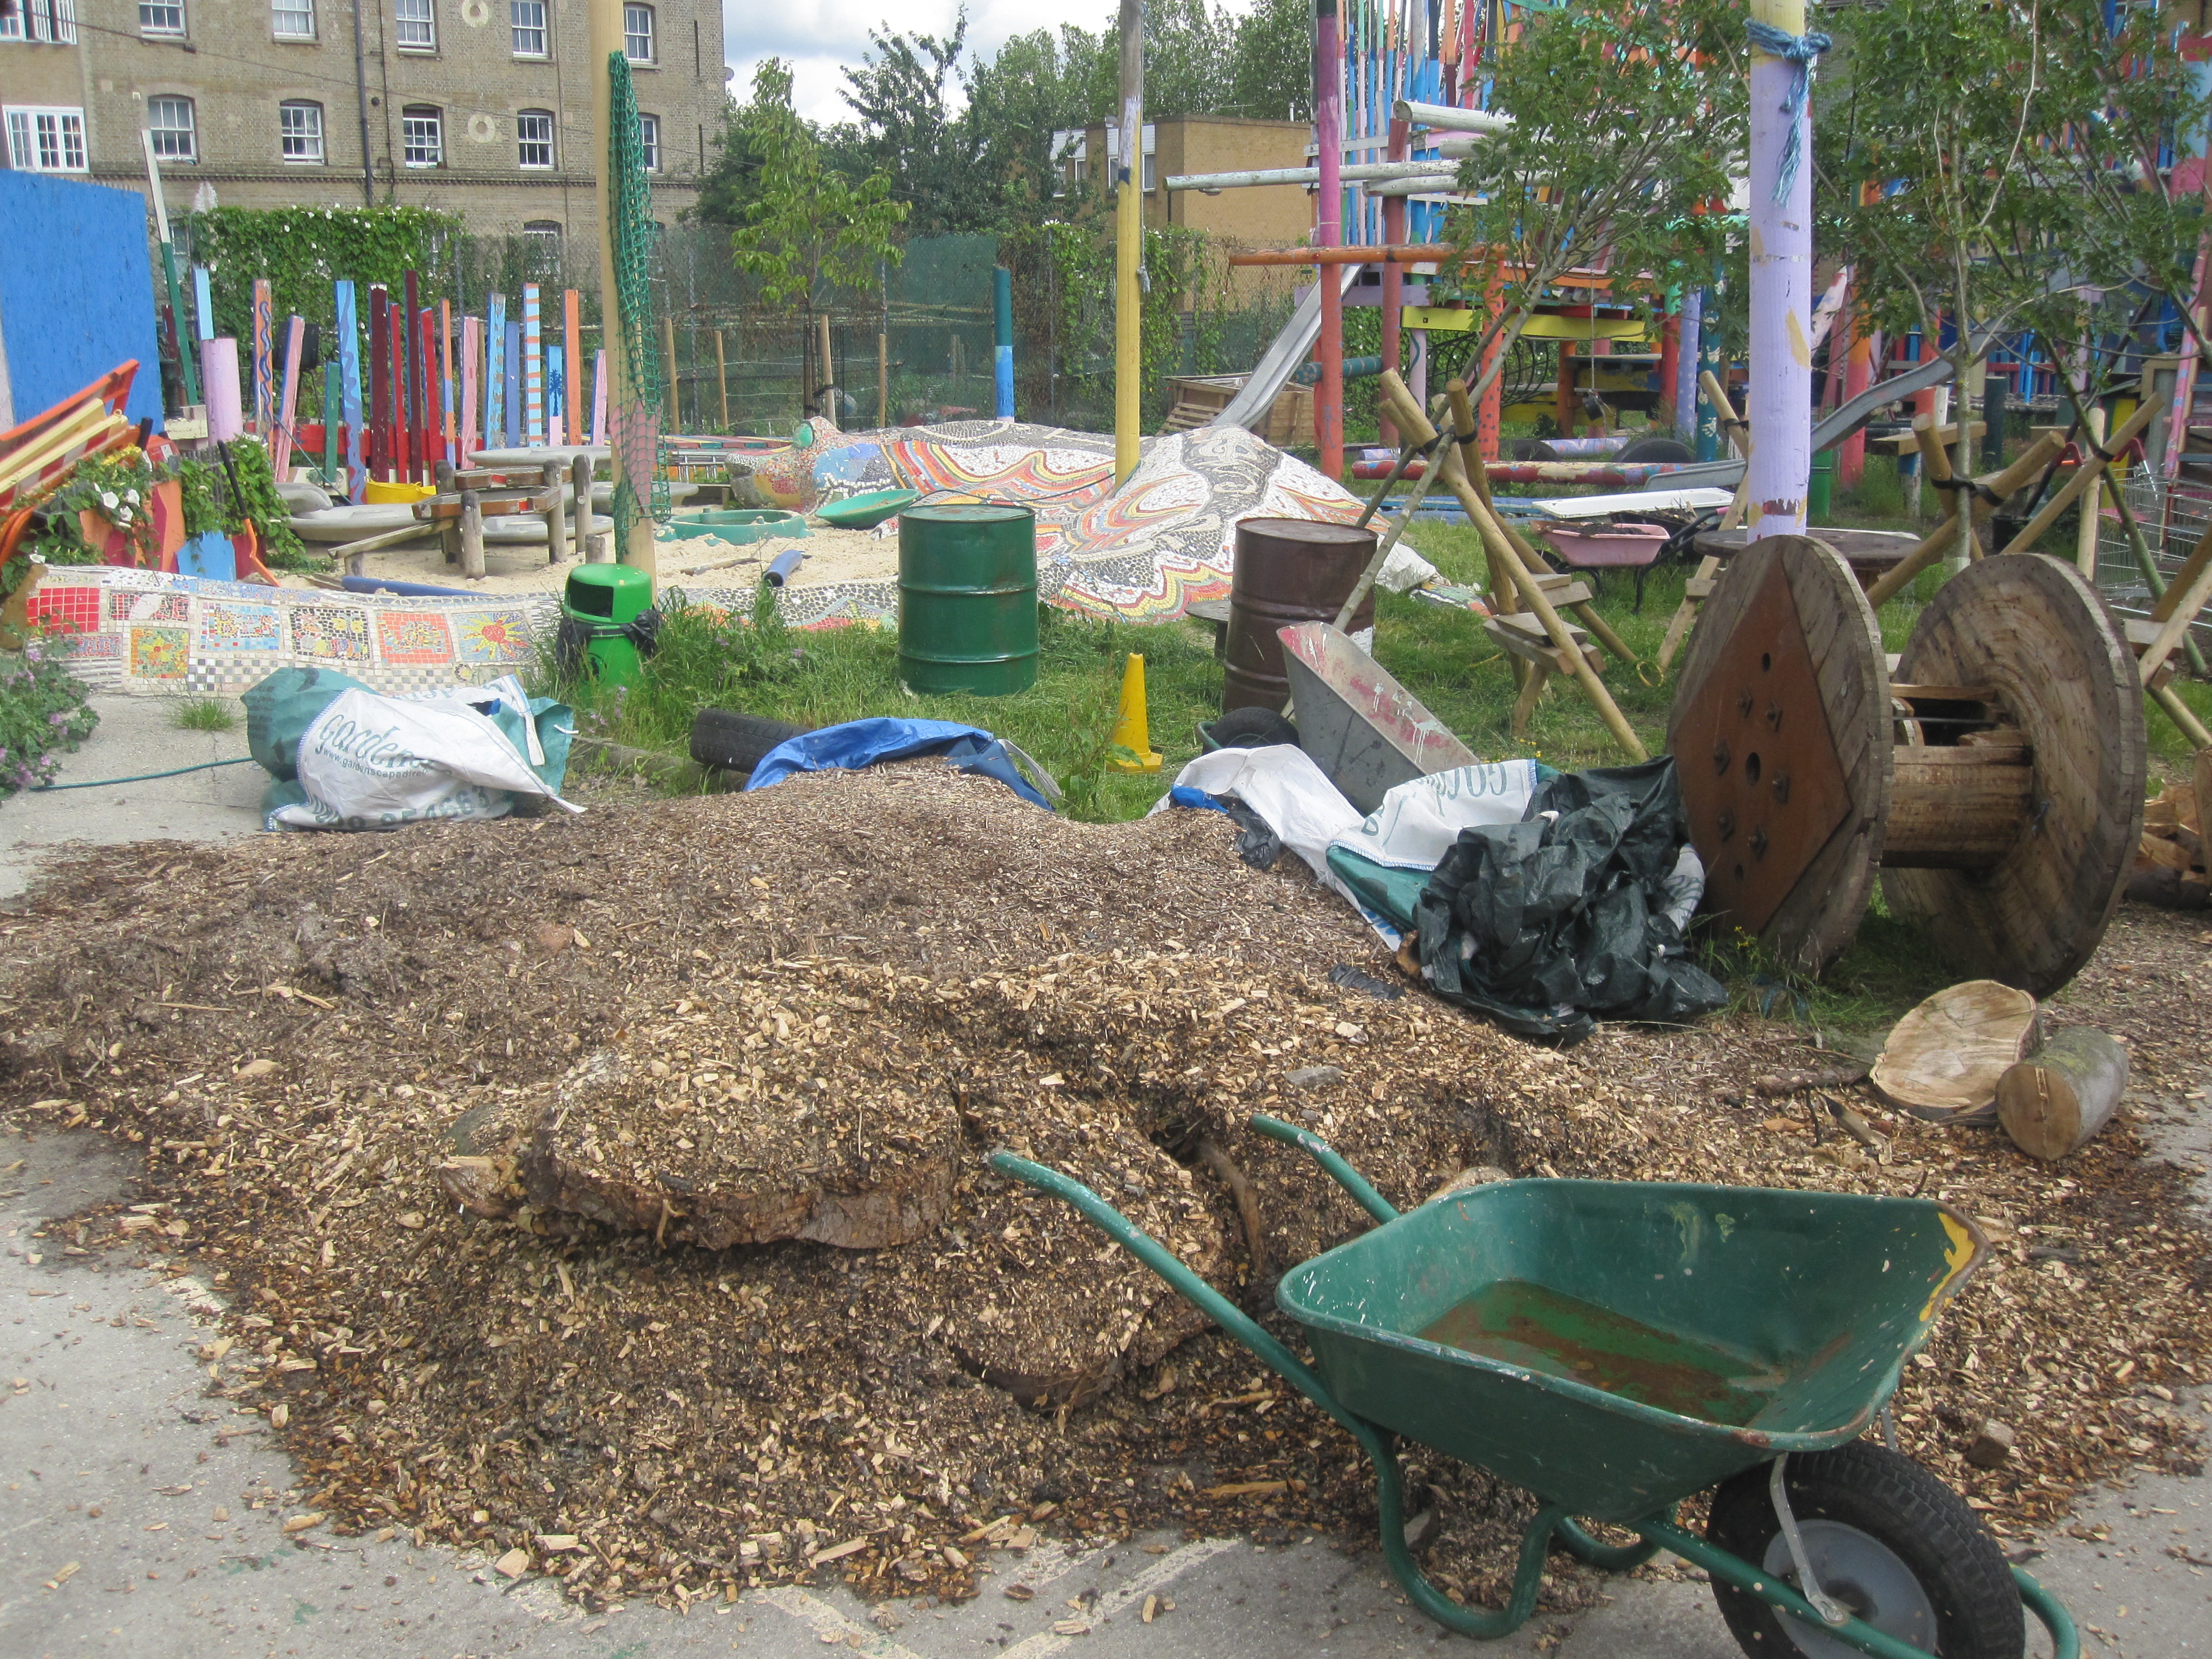 Glamis Adventure Playground in London, where kids play with hammers, wheelbarrows and other risky play inspiration. (Photo credit: Glamis Adventure Playground)